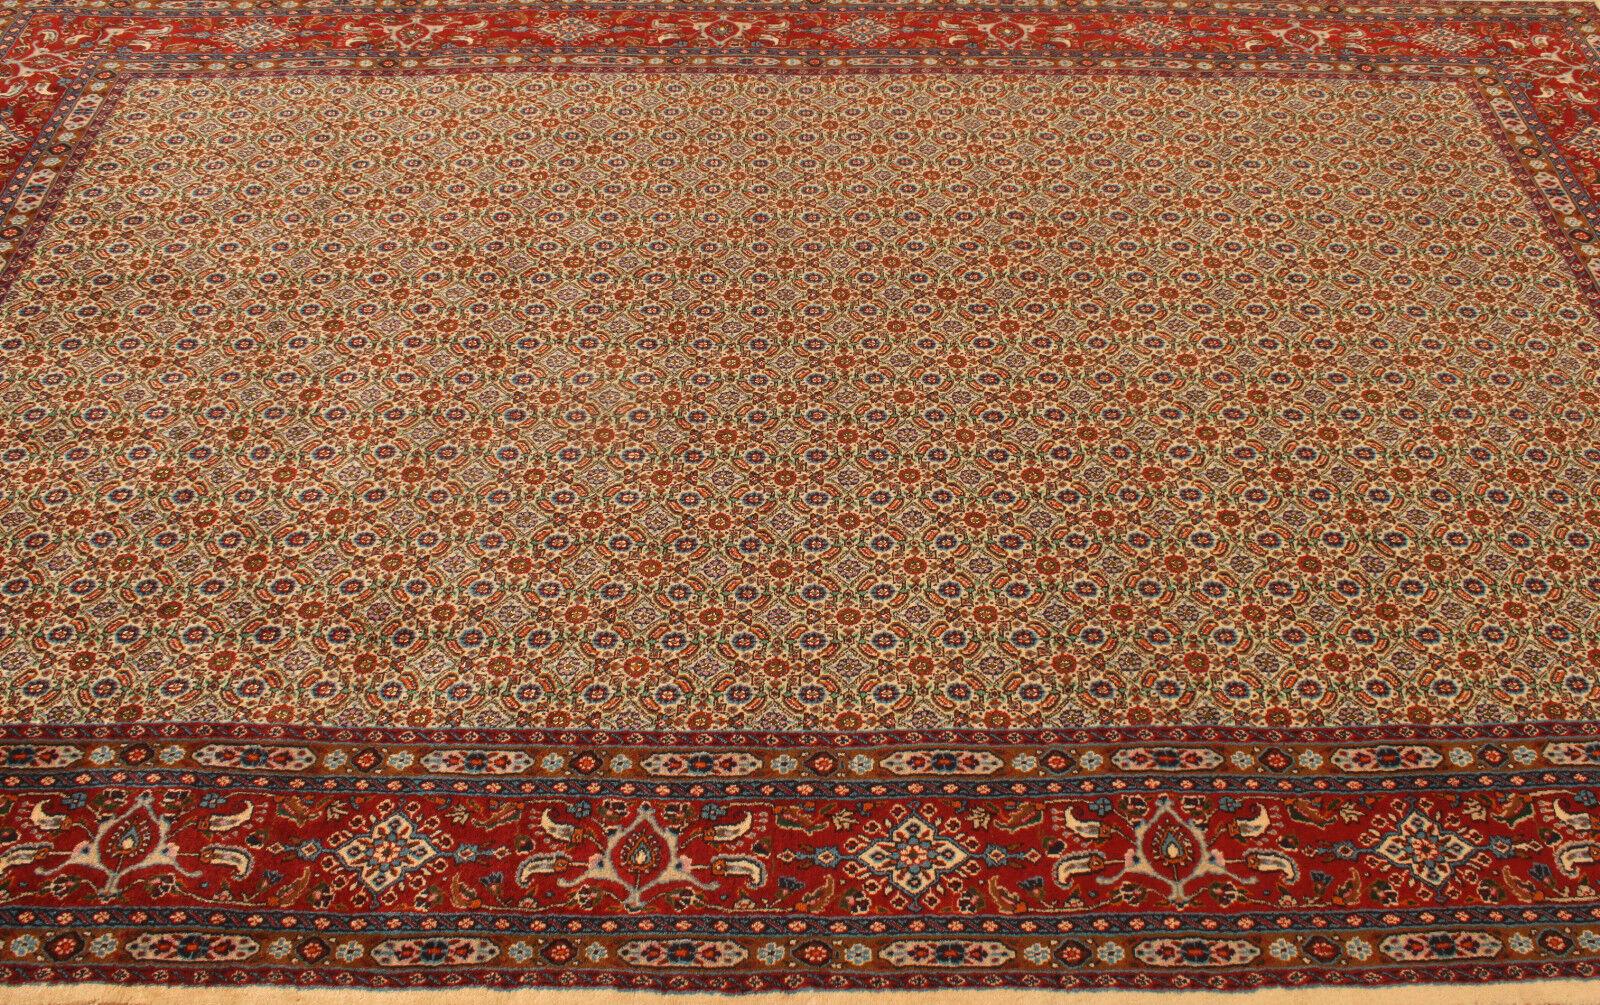 Handmade Vintage Indian Mahal Rug 6.3' x 9.8', 1970s - 1T30 For Sale 2